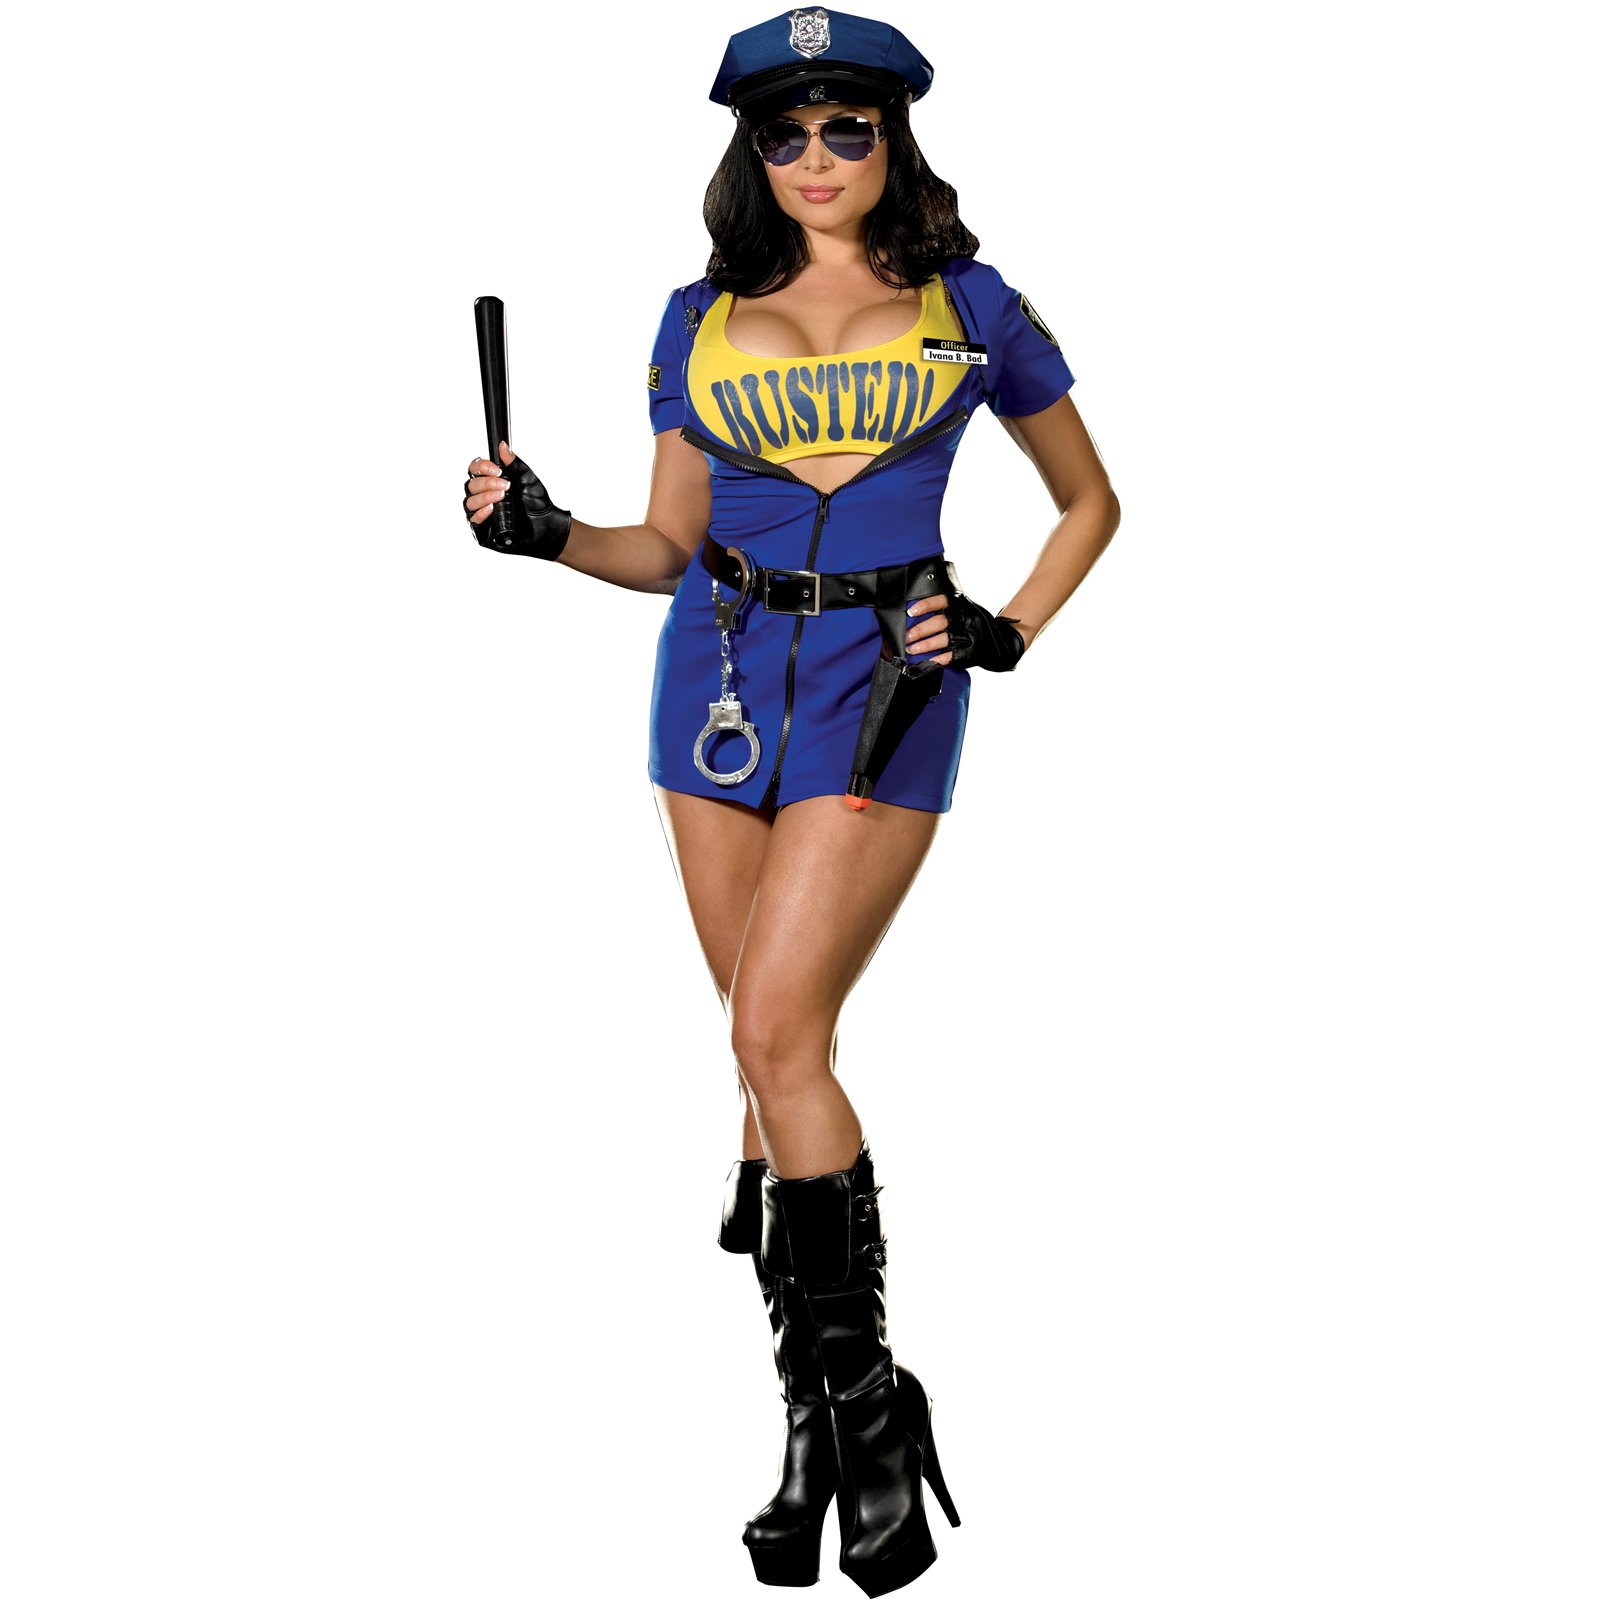 Busted Plus Adult Costume - Click Image to Close